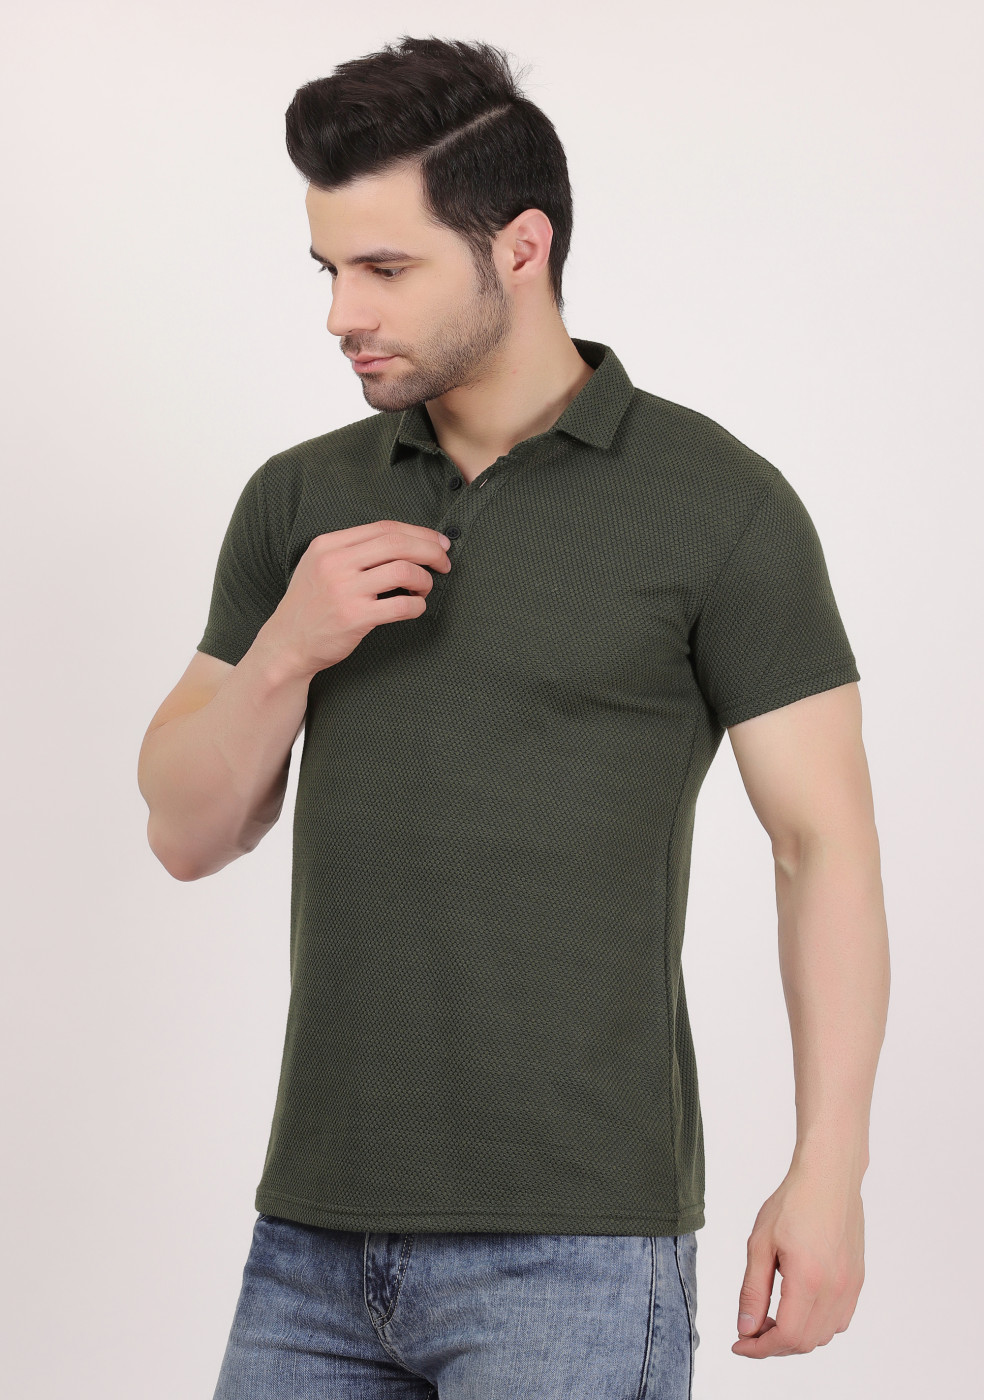 Popcorn Textured Casual Slim Fit Polo T Shirts For Men